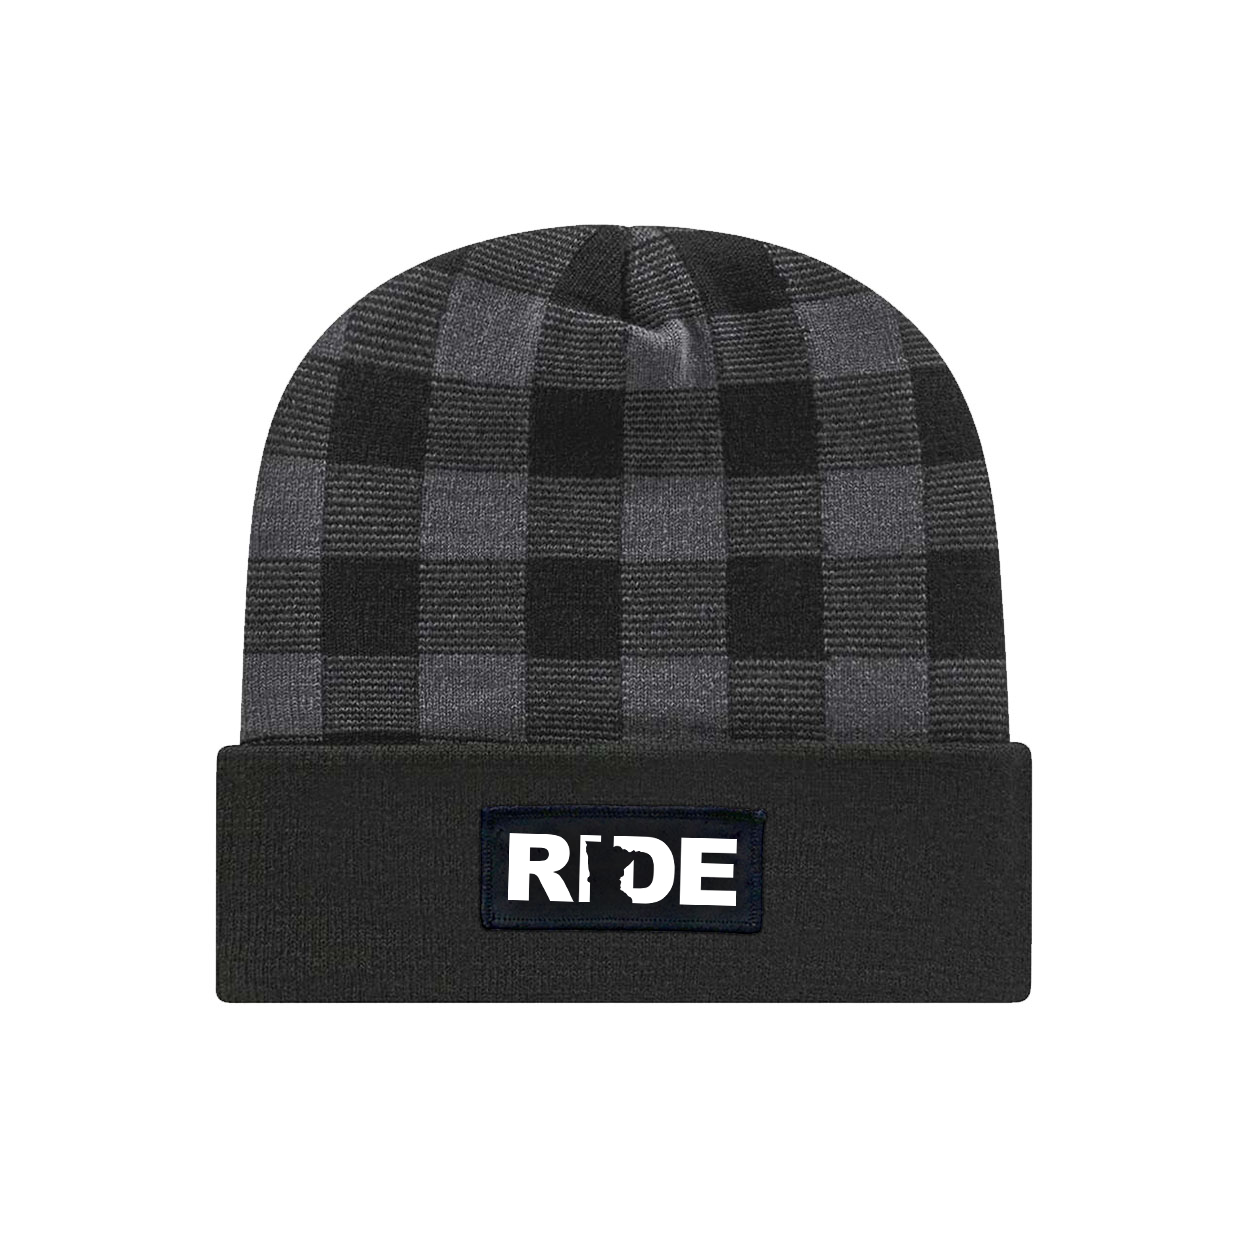 Ride Minnesota Night Out Woven Patch Roll Up Plaid Beanie Black/Heather Gray (White Logo)